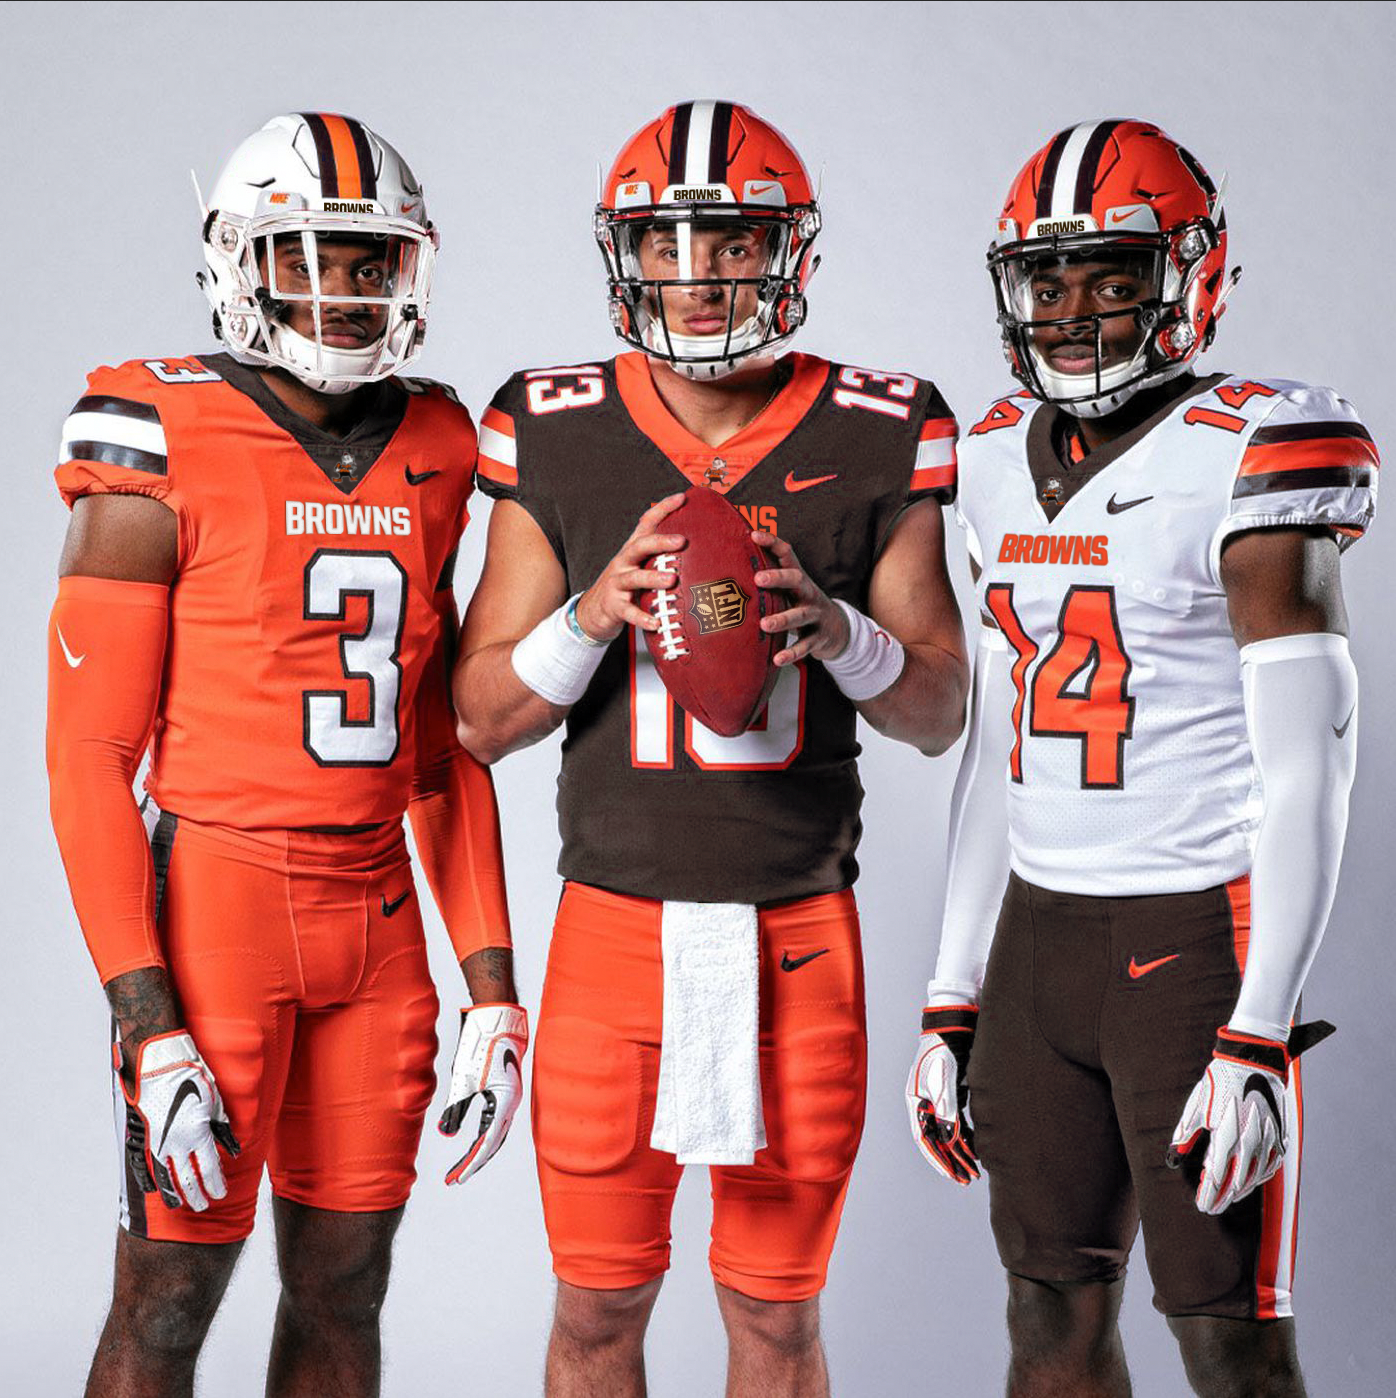 new browns jersey 2020